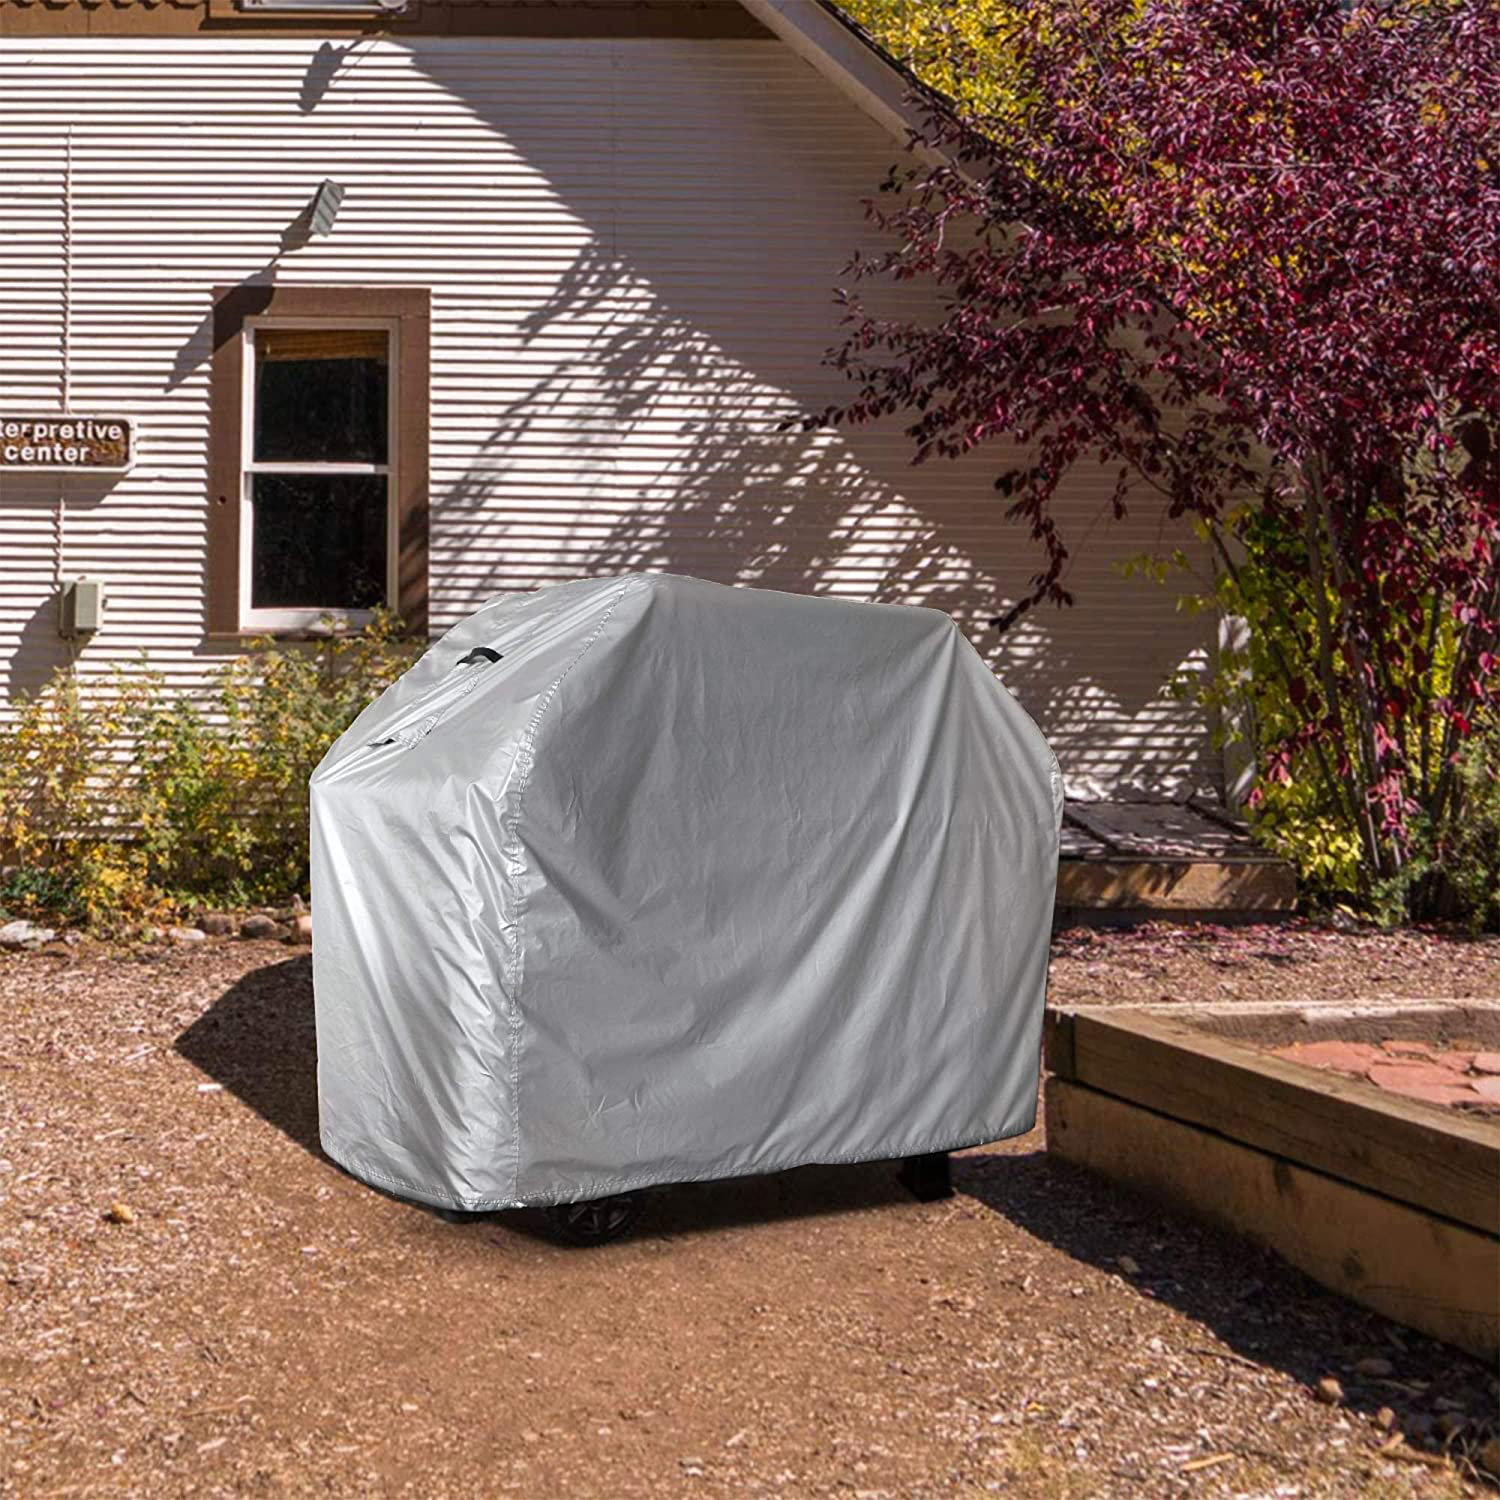 BBQ Gas Grill Cover 58" Barbecue Waterproof Outdoor Heavy Duty UV & Dust Proof